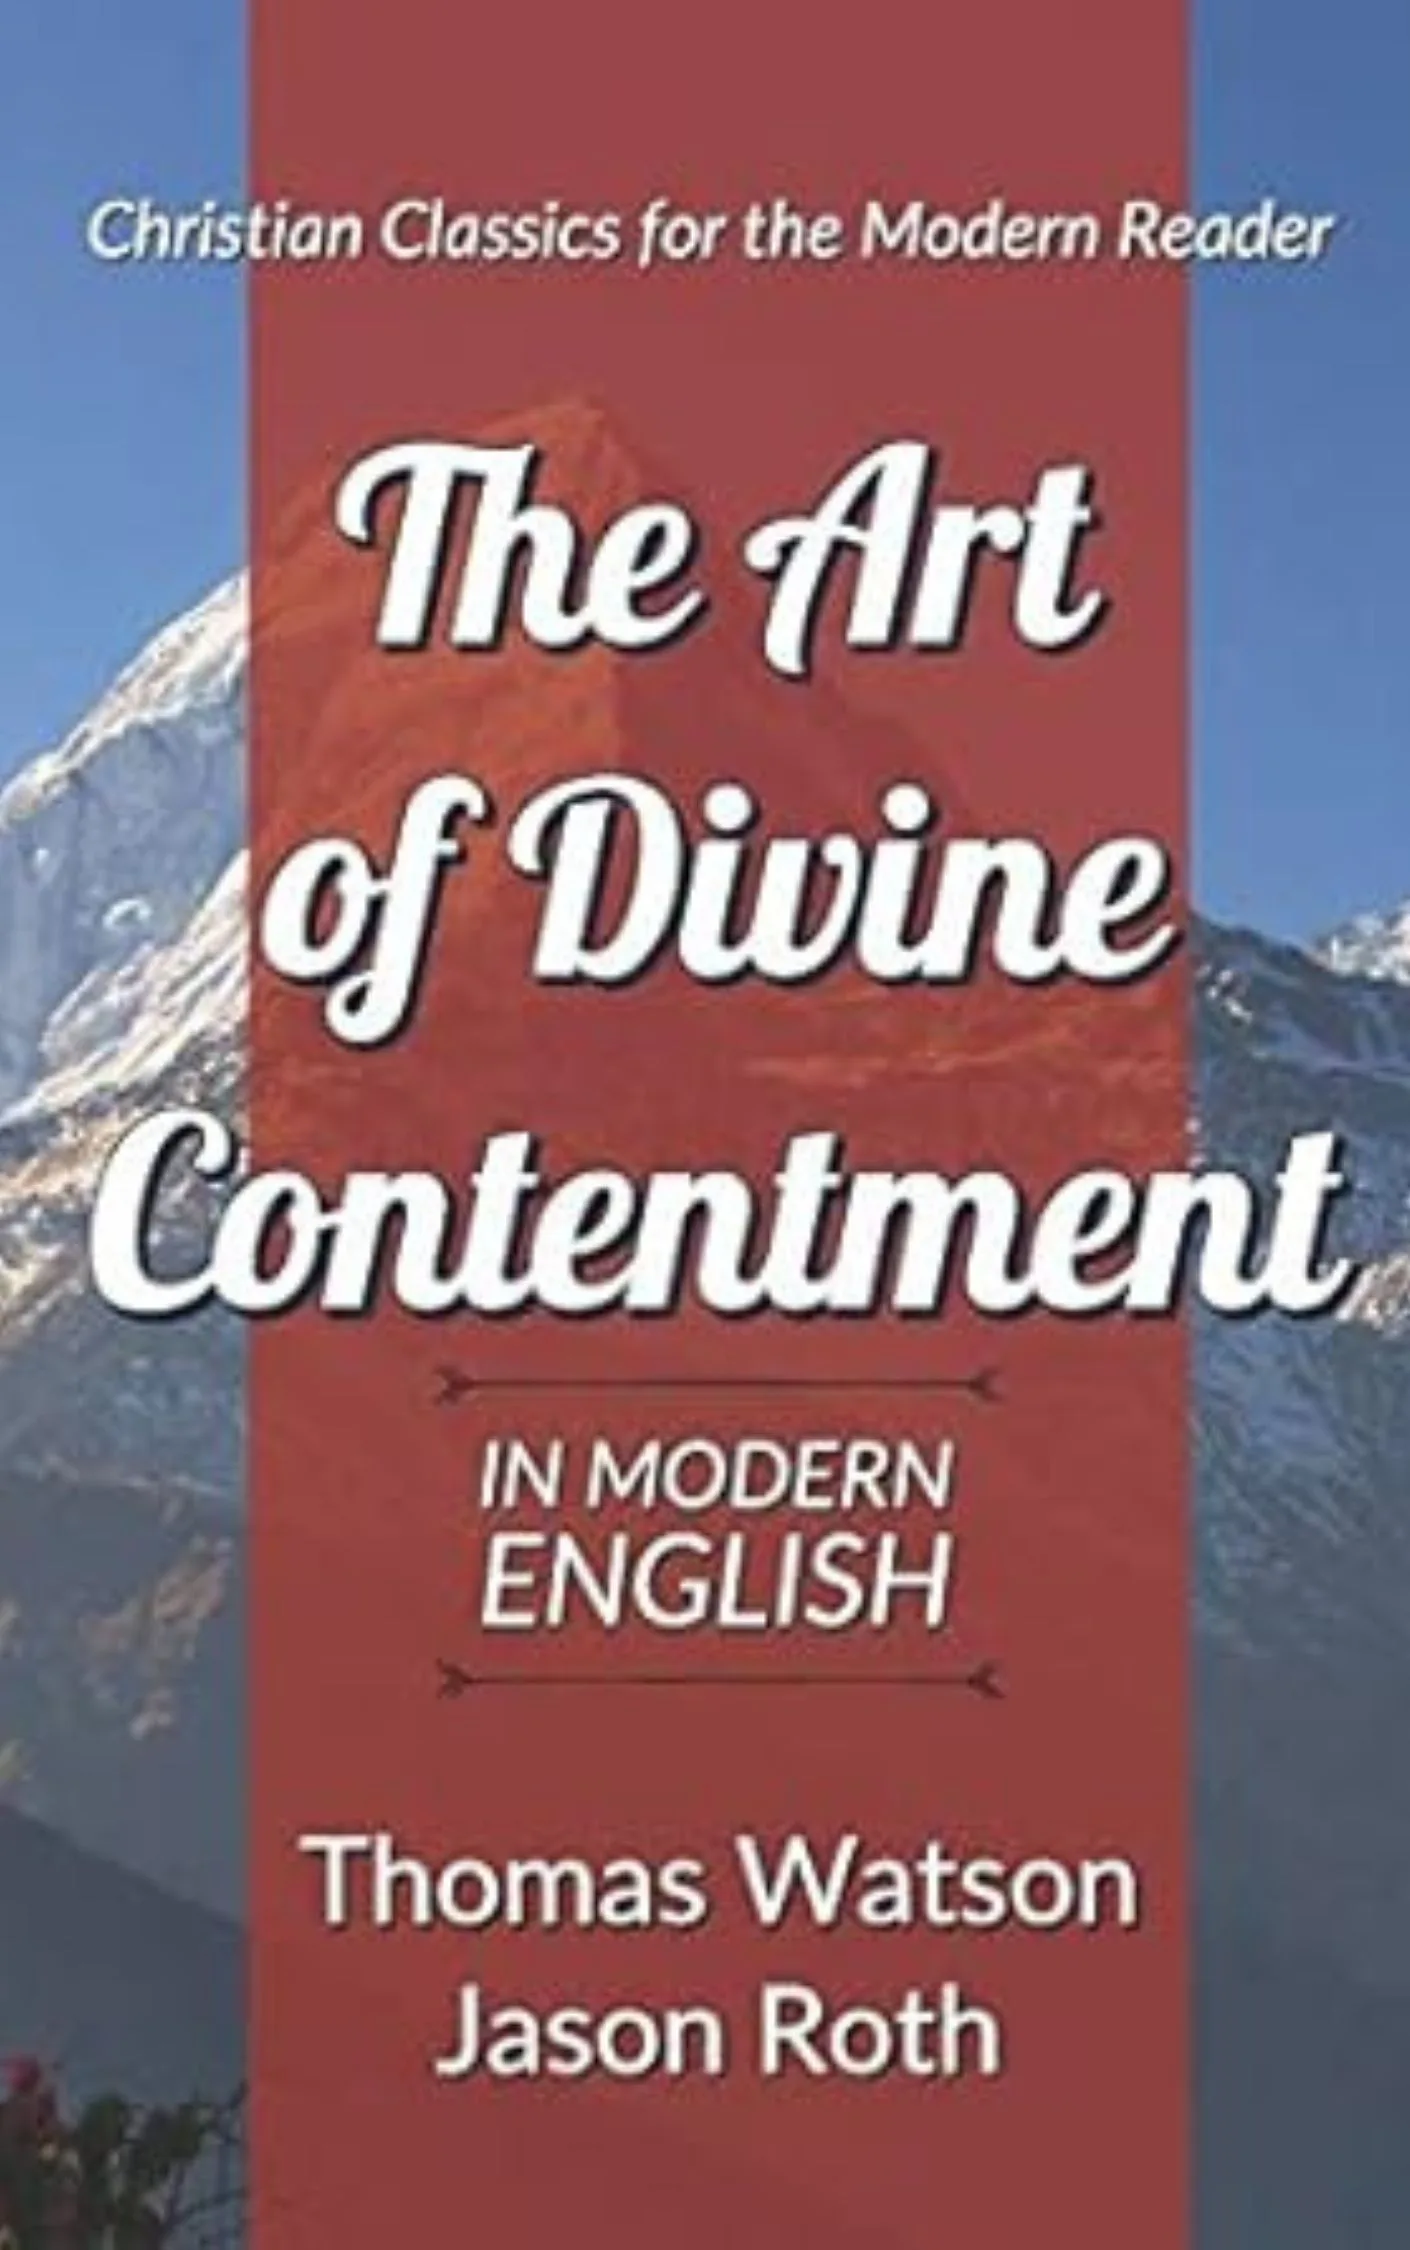 The Art of Divine Contentment by Thomas Watson